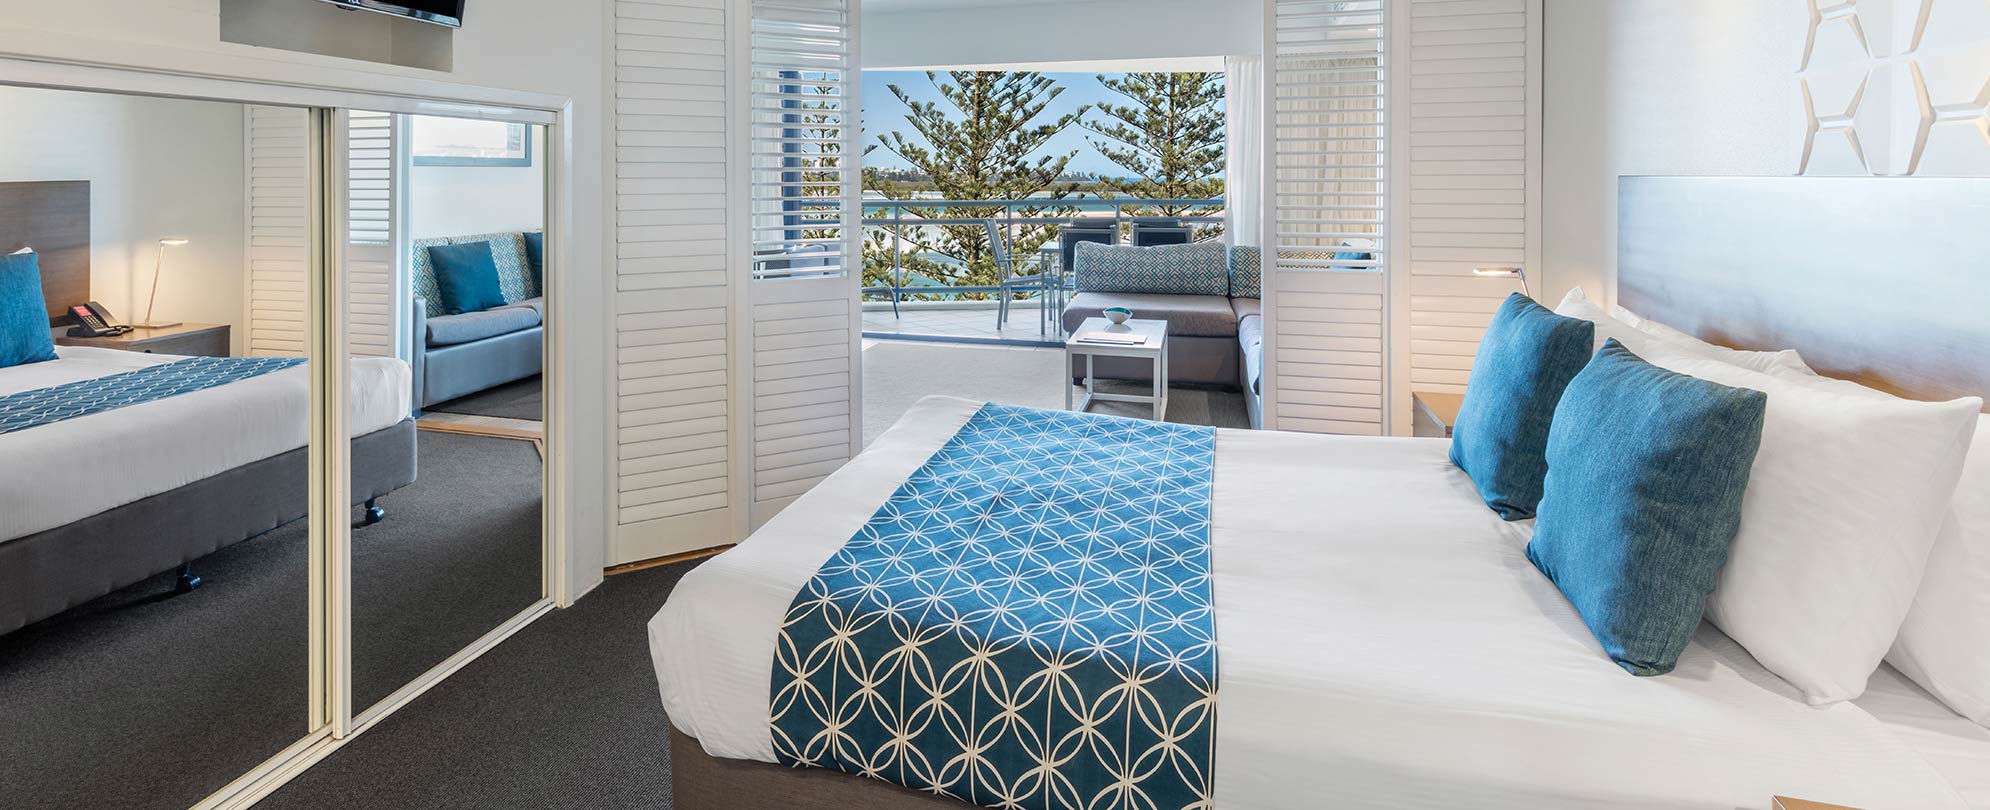 The master bedroom in a 2-bedroom suite at Club Wyndham Golden Beach.